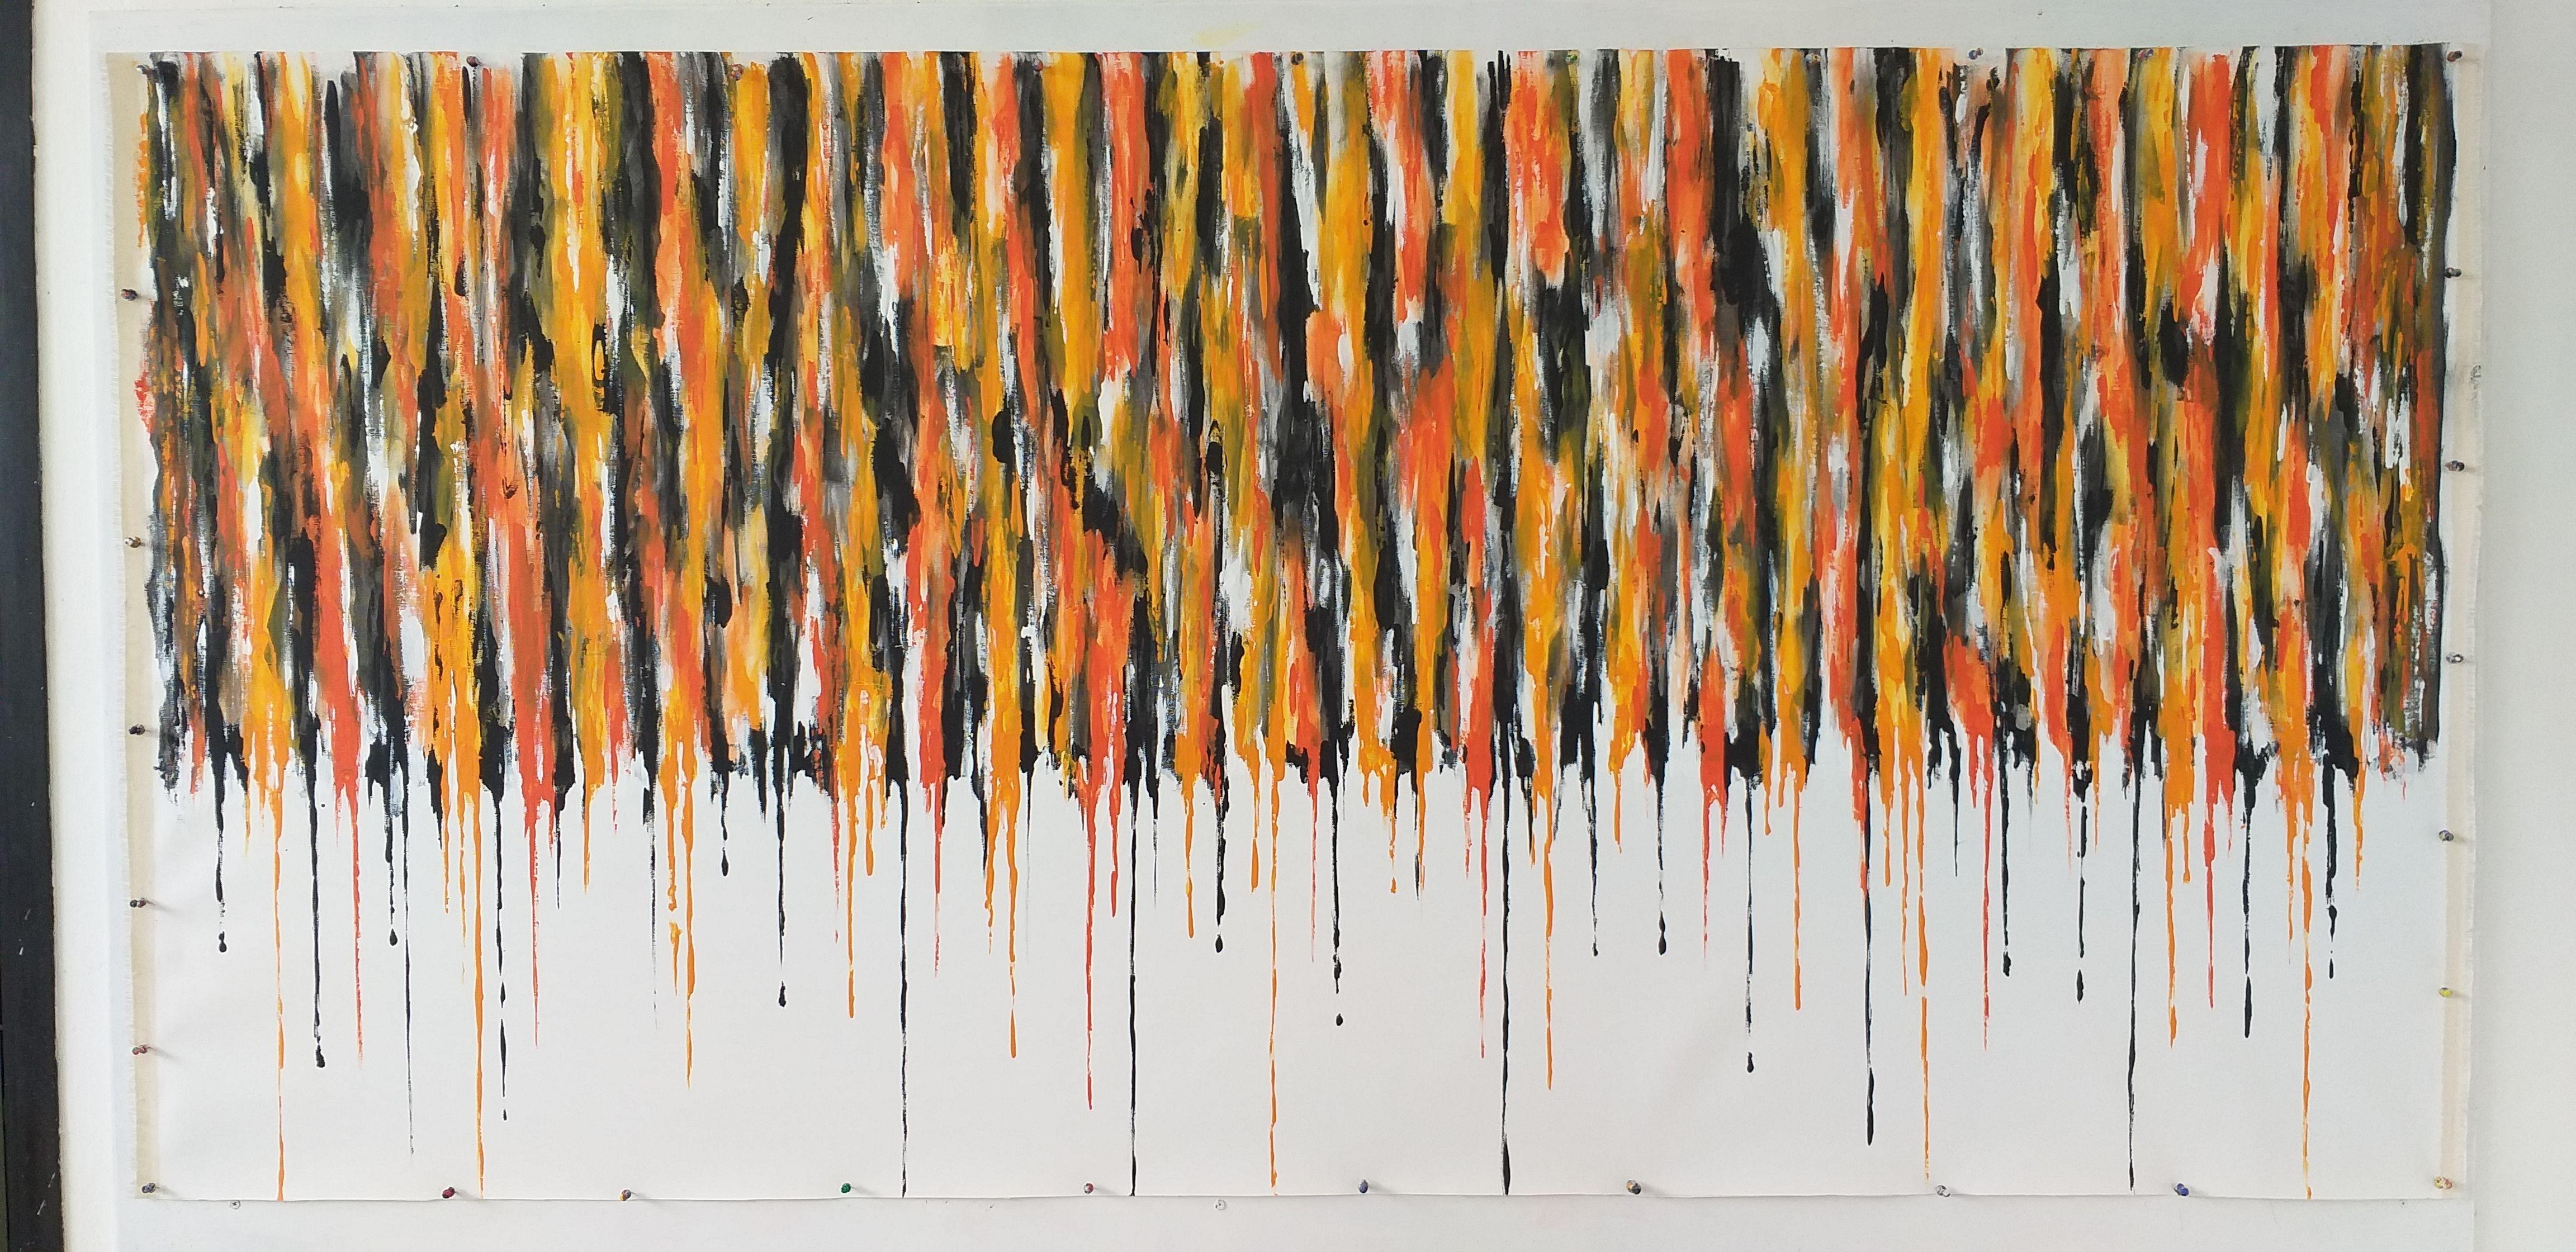 Â« Drips 9 Â» by M.Y.  Painting size 95cm x 200cm (37,40in x 78,70in)   un-stretched, no frame.  The original size of the canvas 106cm x 213cm (41,70in x 83,80in). the painting is with extra canvas on the sides for stretching.  The real color of the